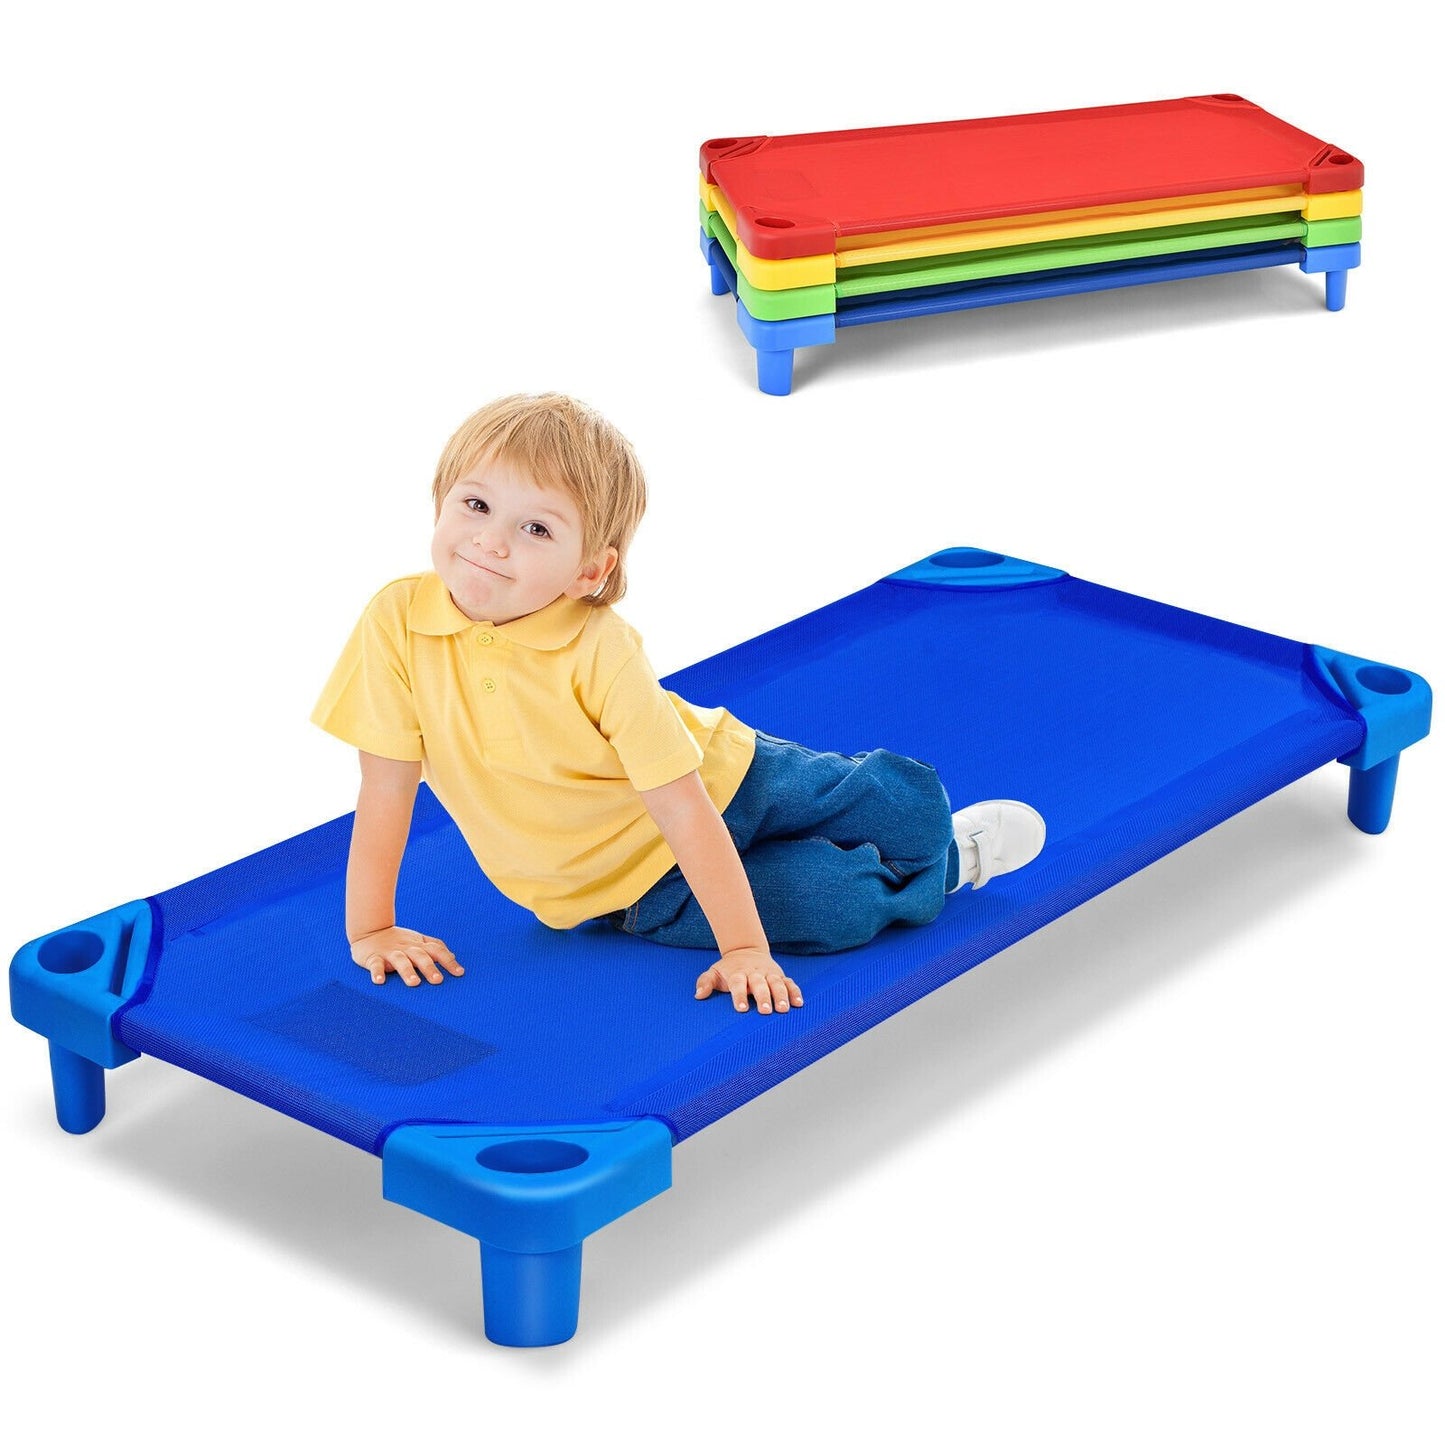 Pack of 4 Colorful Kids Stackable Naptime Cot, Multicolor